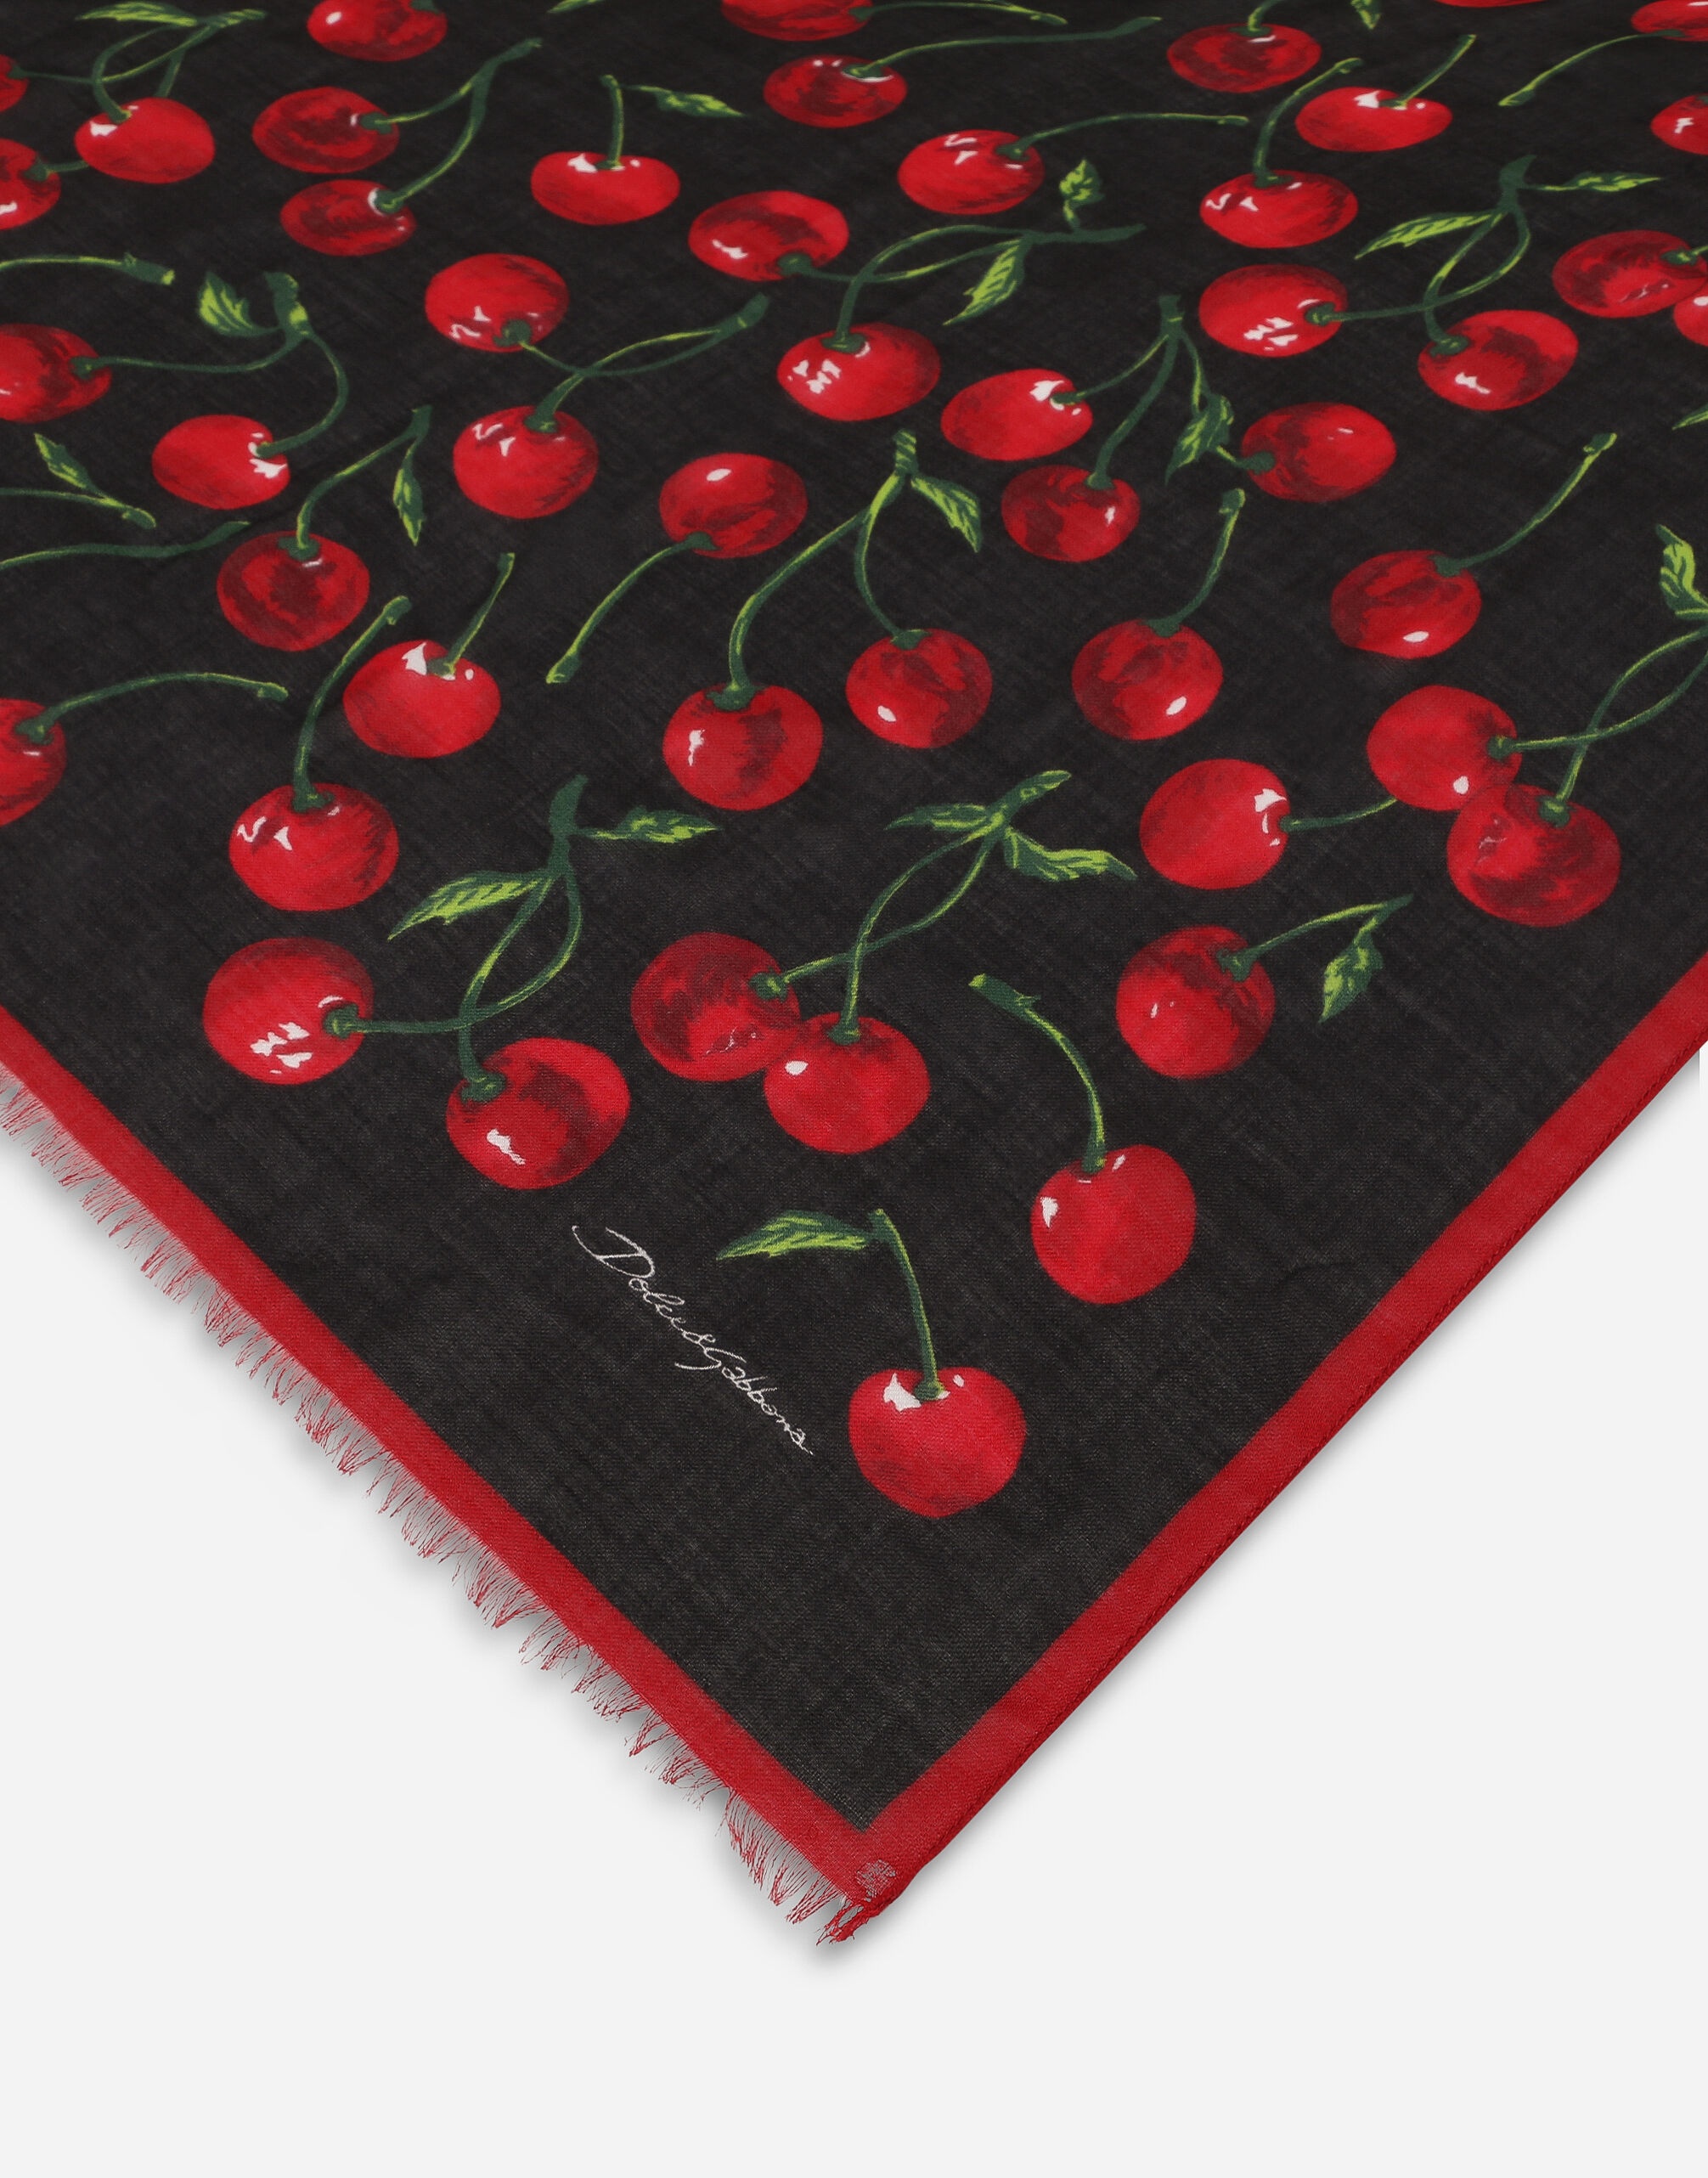 Cherry-print cashmere and modal scarf (135x200) - 2